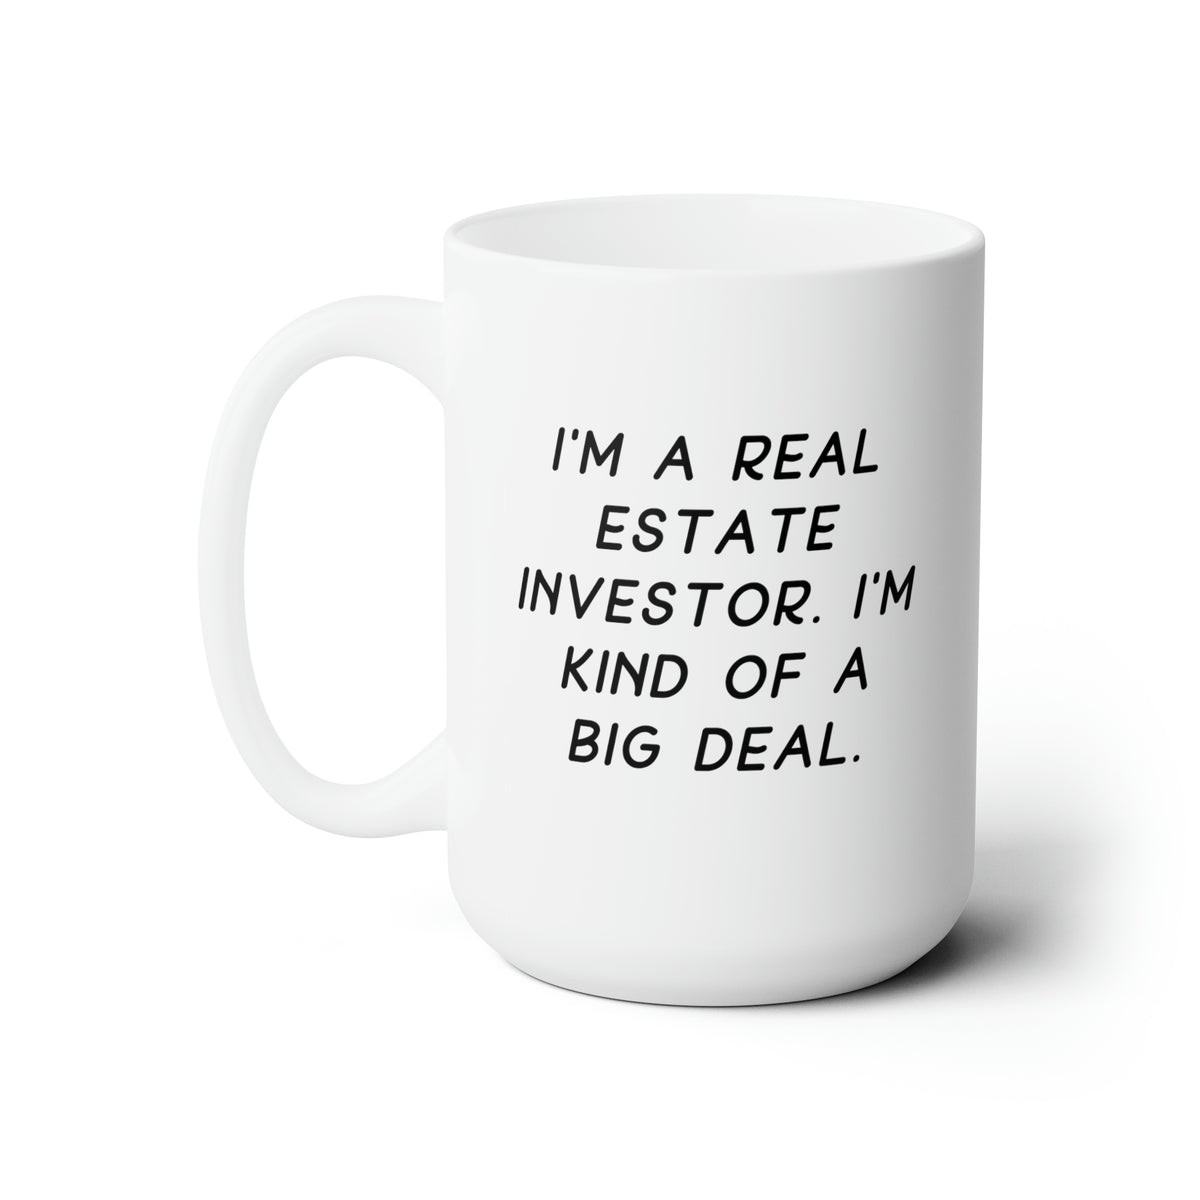 Special Real Estate Investor Gifts, I'm a Real Estate, Real Estate Investor 11oz 15oz Mug From Boss, Gifts For Coworkers, Gifts for real estate investors, Fun gifts for real estate investors, Unique